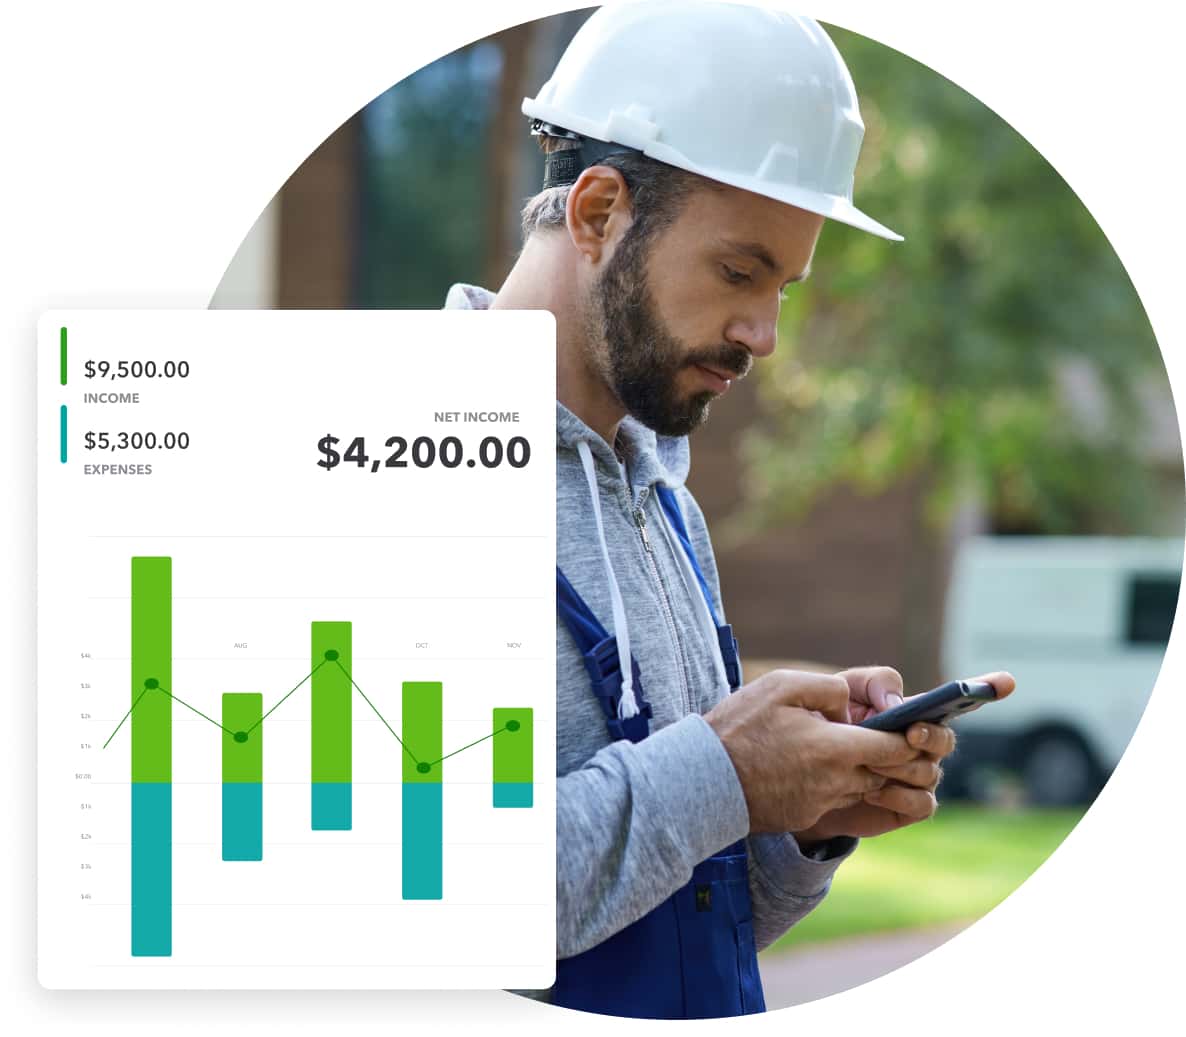 Construction worker checks his phone; overlay product screen showing profit and loss over months, plus net income.